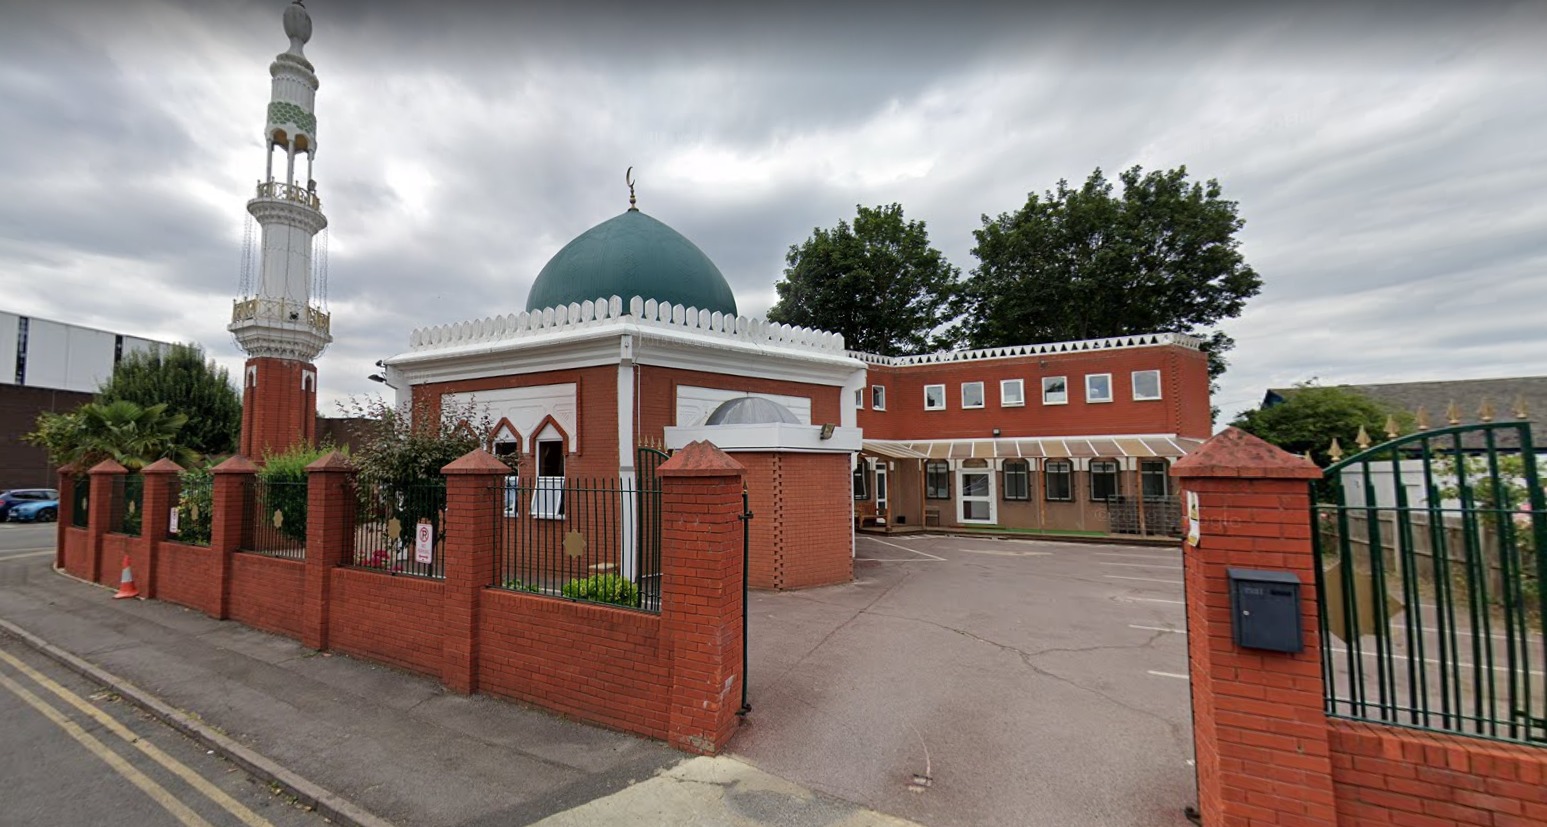 Mr Dudley made his bombshell speech at the Maidenhead Mosque